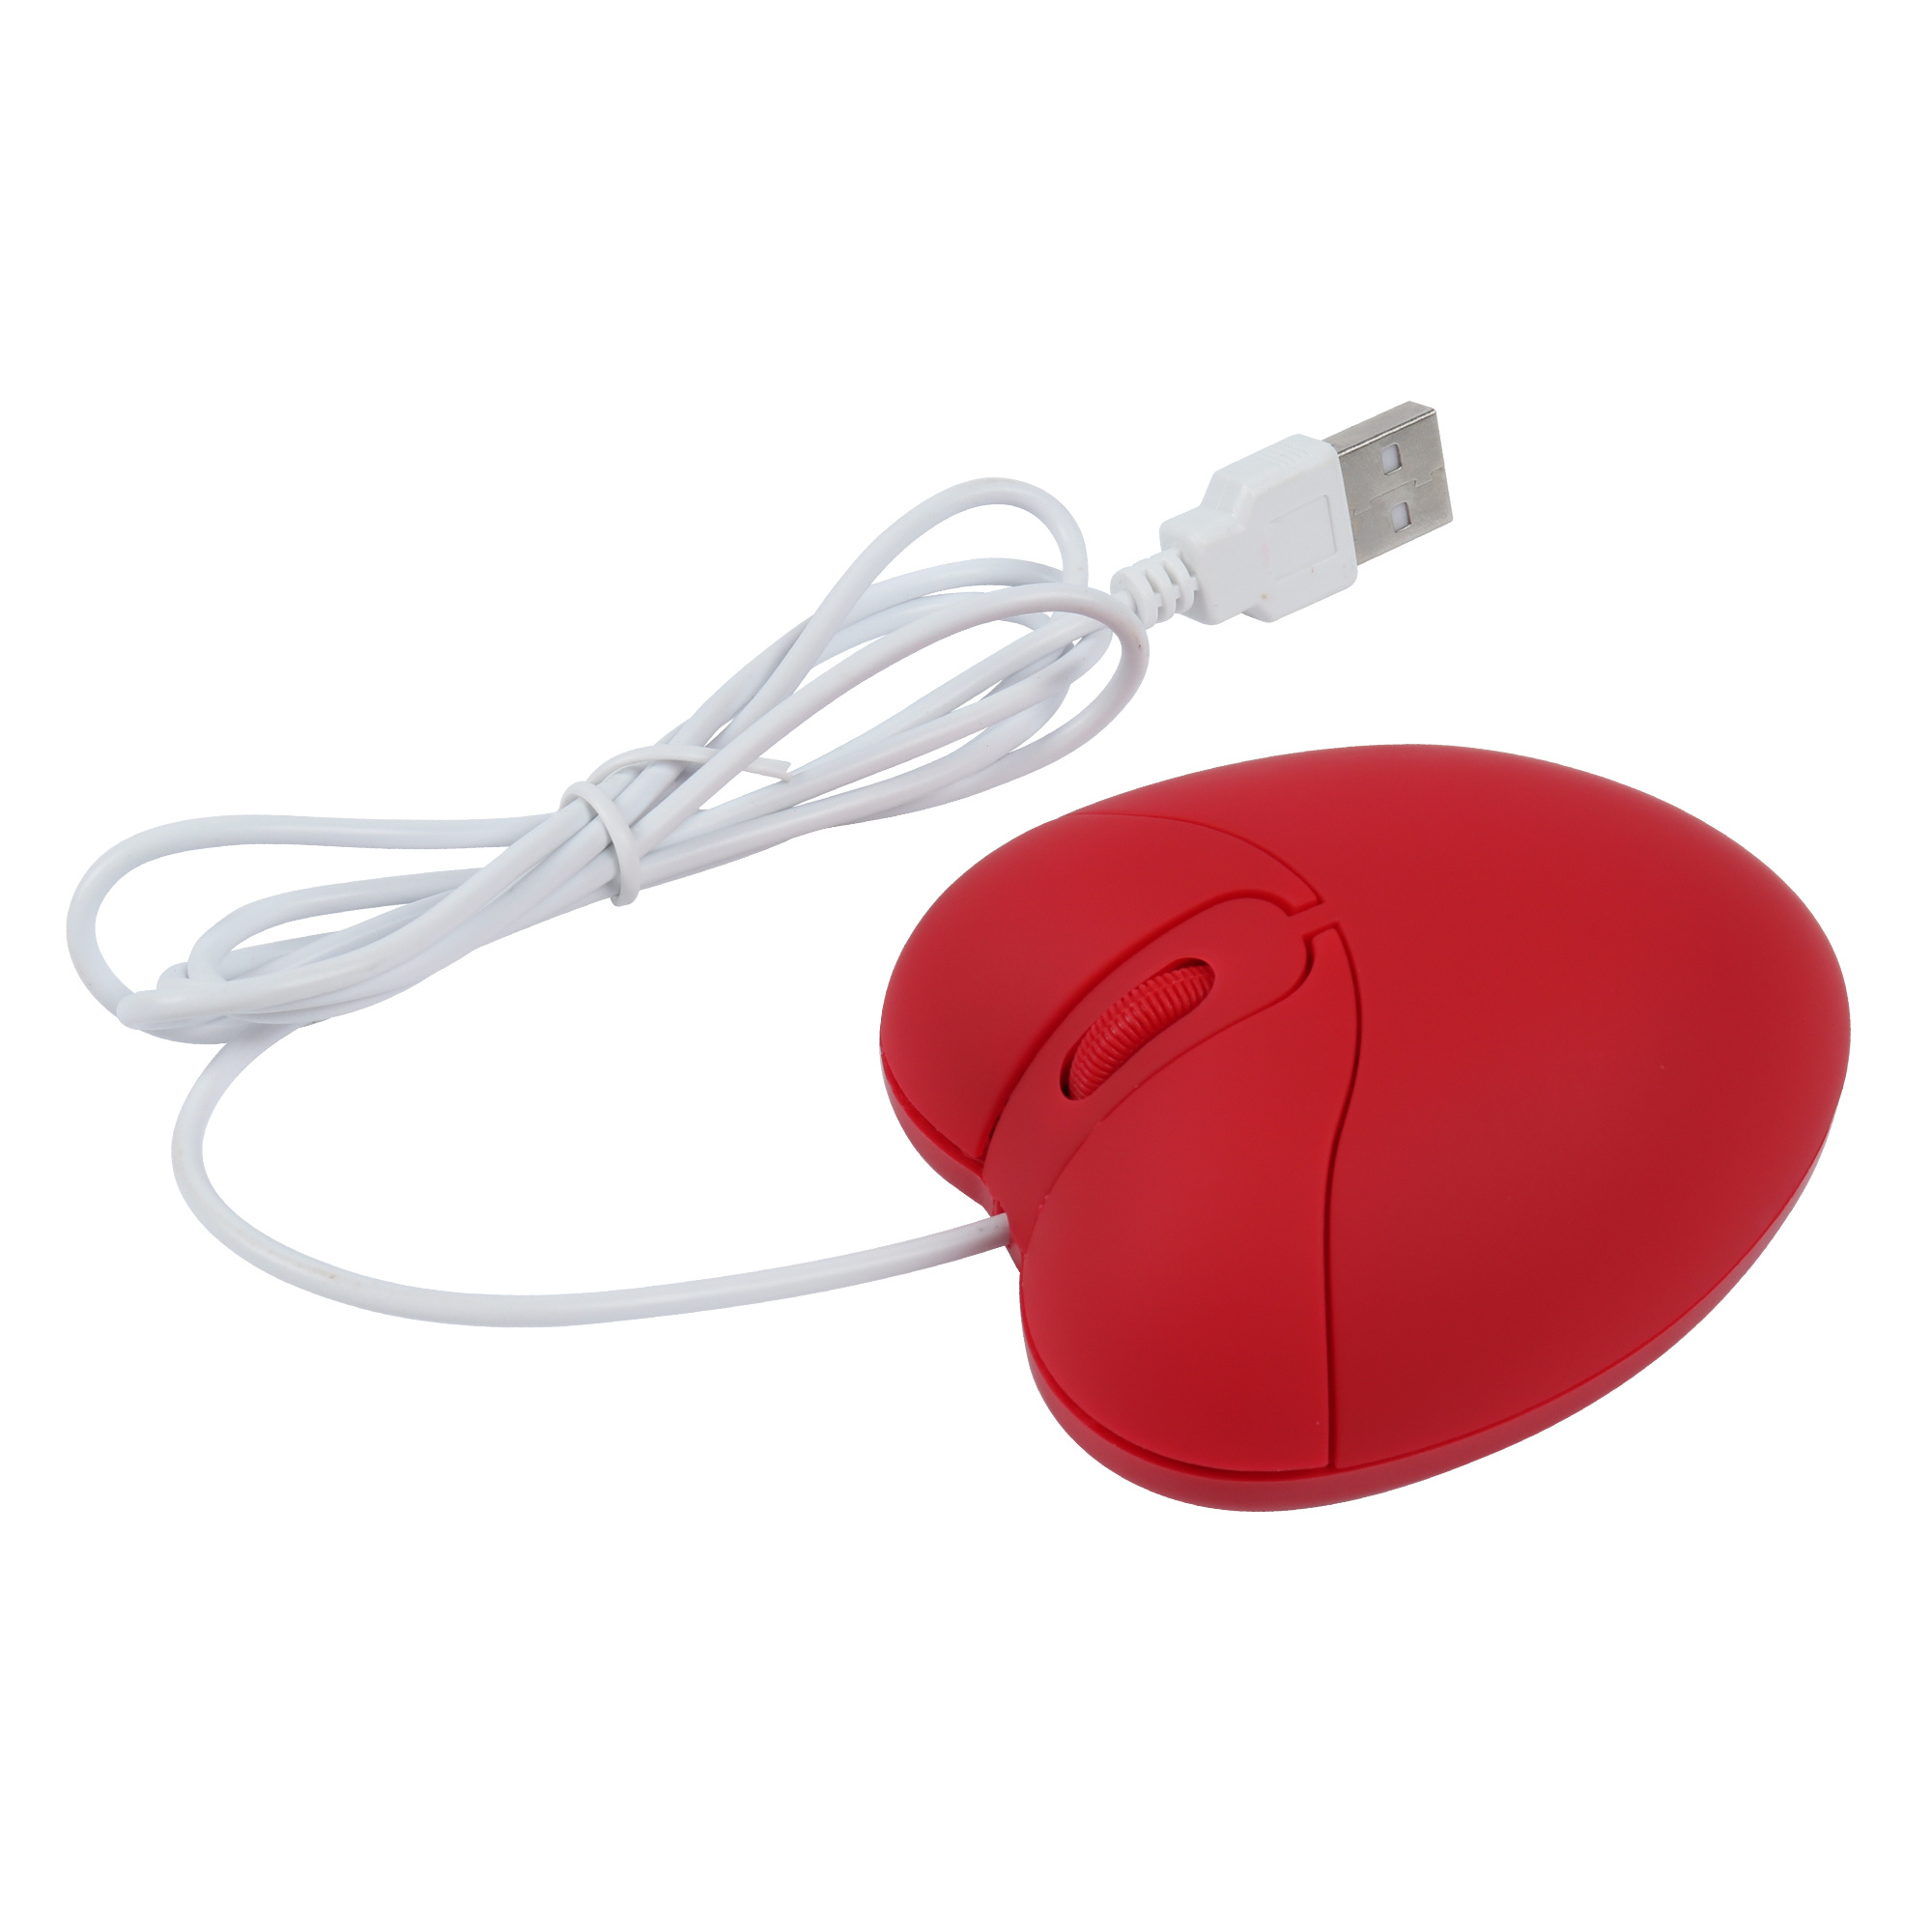 Computer-Wired-Mouse-USB-Optical-Creative-Gaming-Cute-Mause-Ergonomic-Love-Heart-3D-Mäuse-für-Laptop (6)